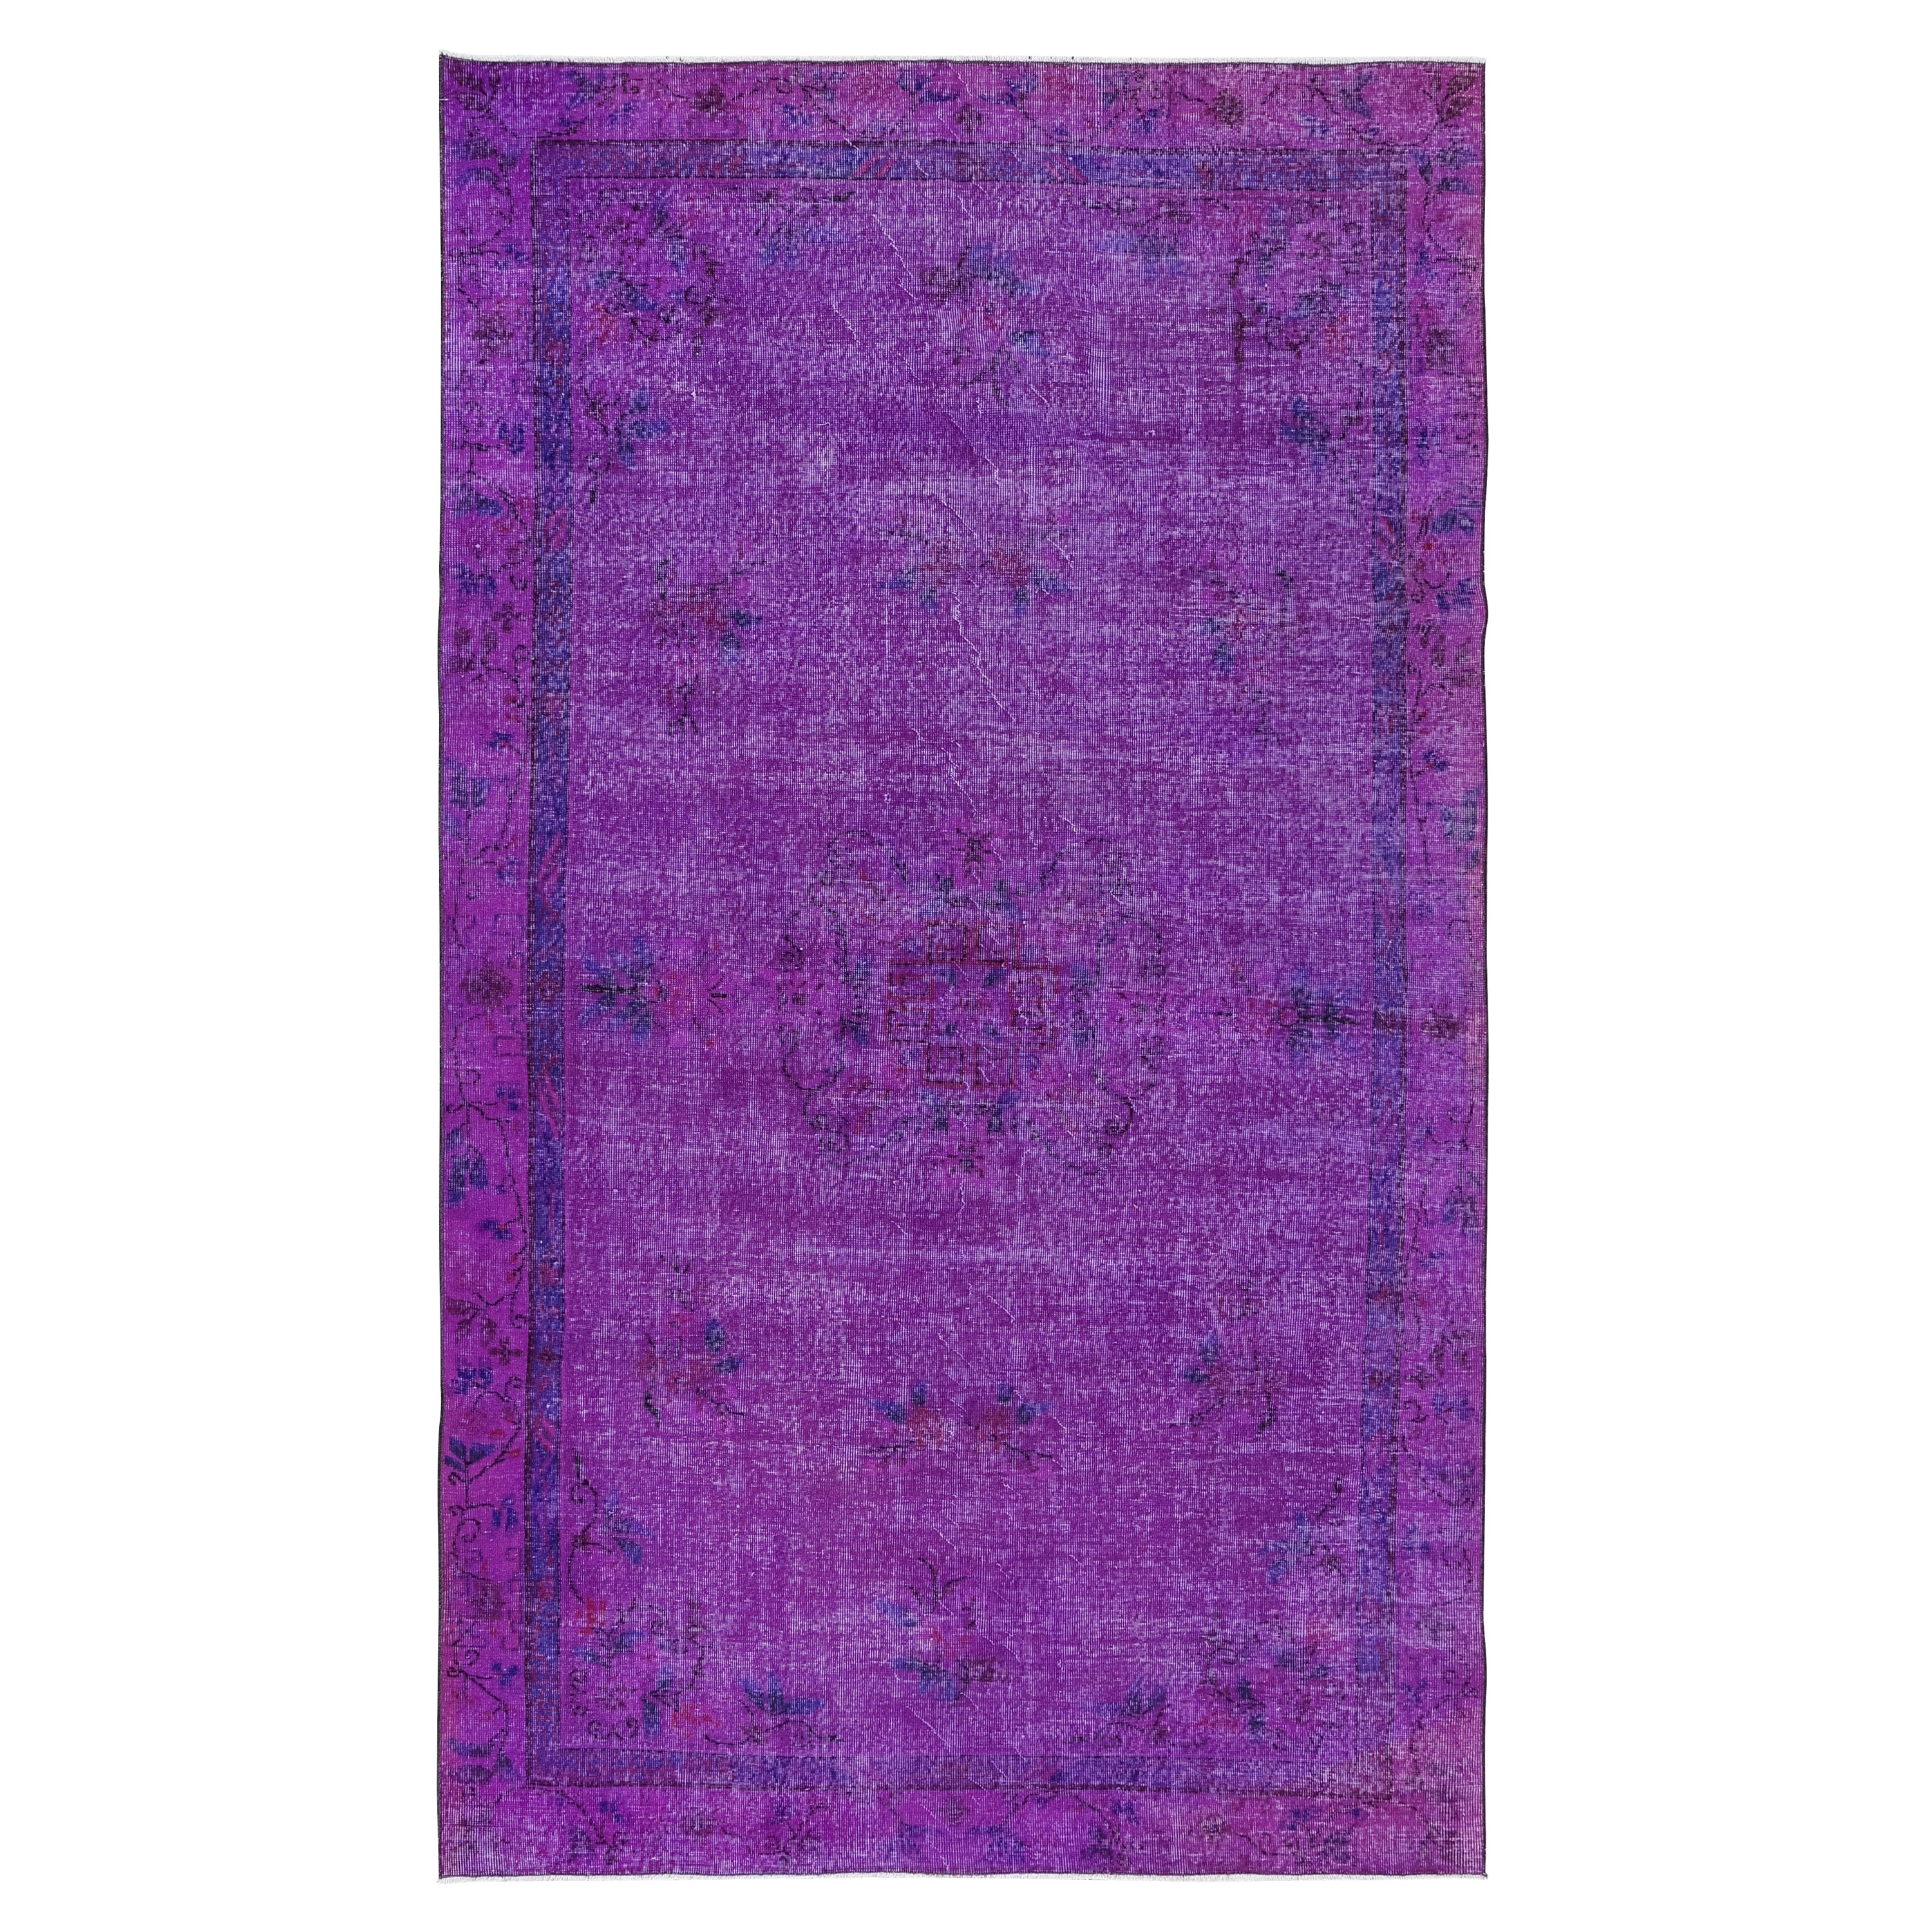 6.4x10.6 Ft Contemporary Wool Area Rug in Purple, Hand-Knotted in Turkey